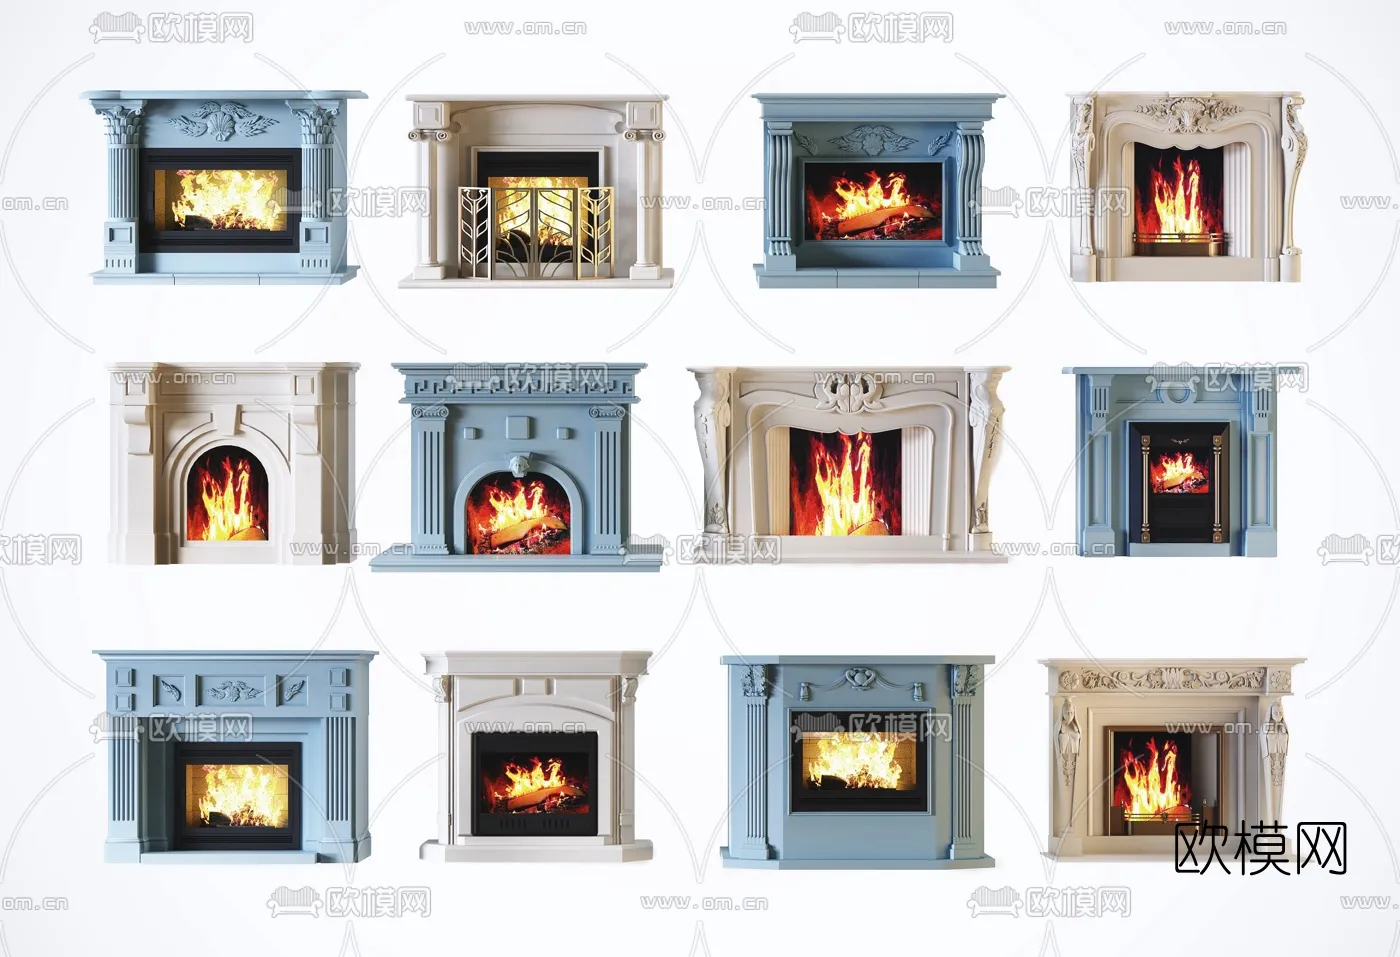 CLASSIC – FIREPLACE 3DMODELS – 016